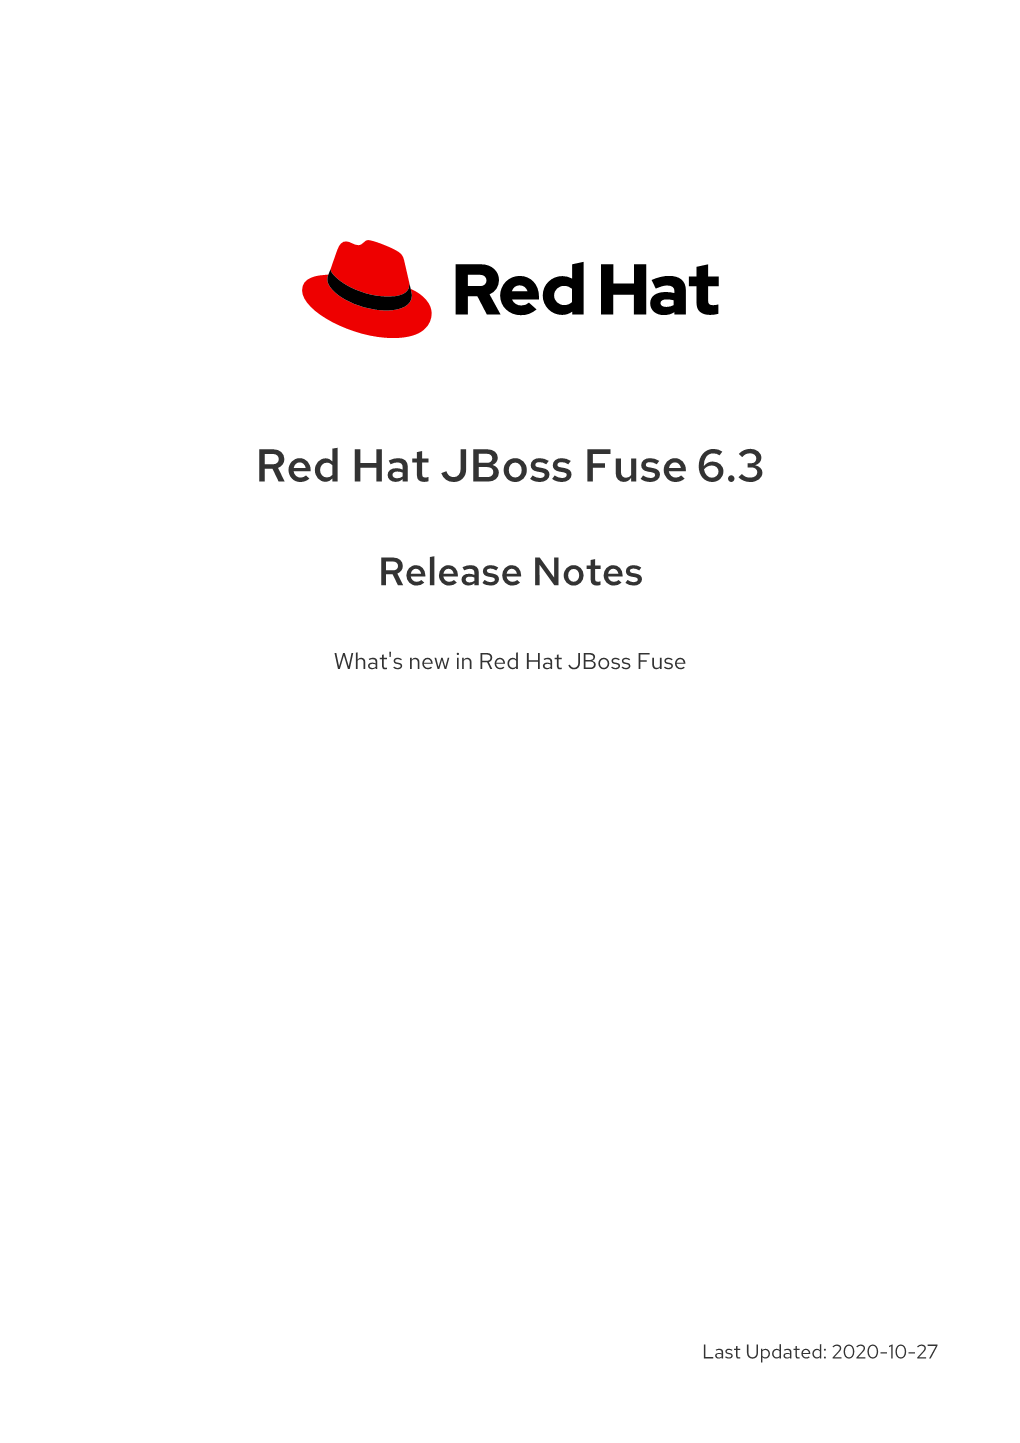 Red Hat Jboss Fuse 6.3 Release Notes